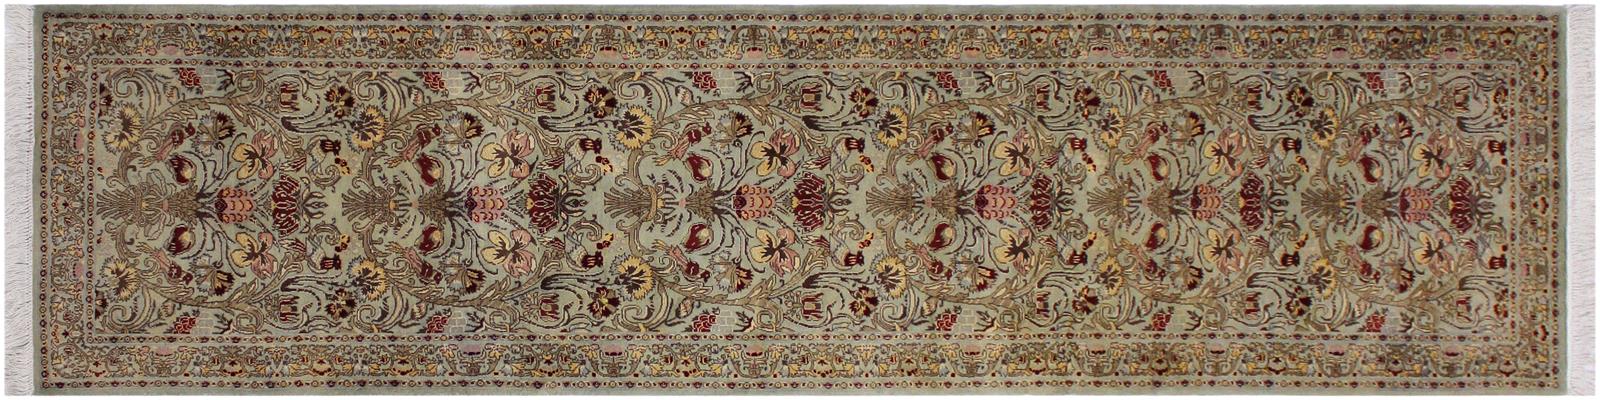 handmade Traditional Sayra Green Brown Hand Knotted RUNNER 100% WOOL area rug 2x10